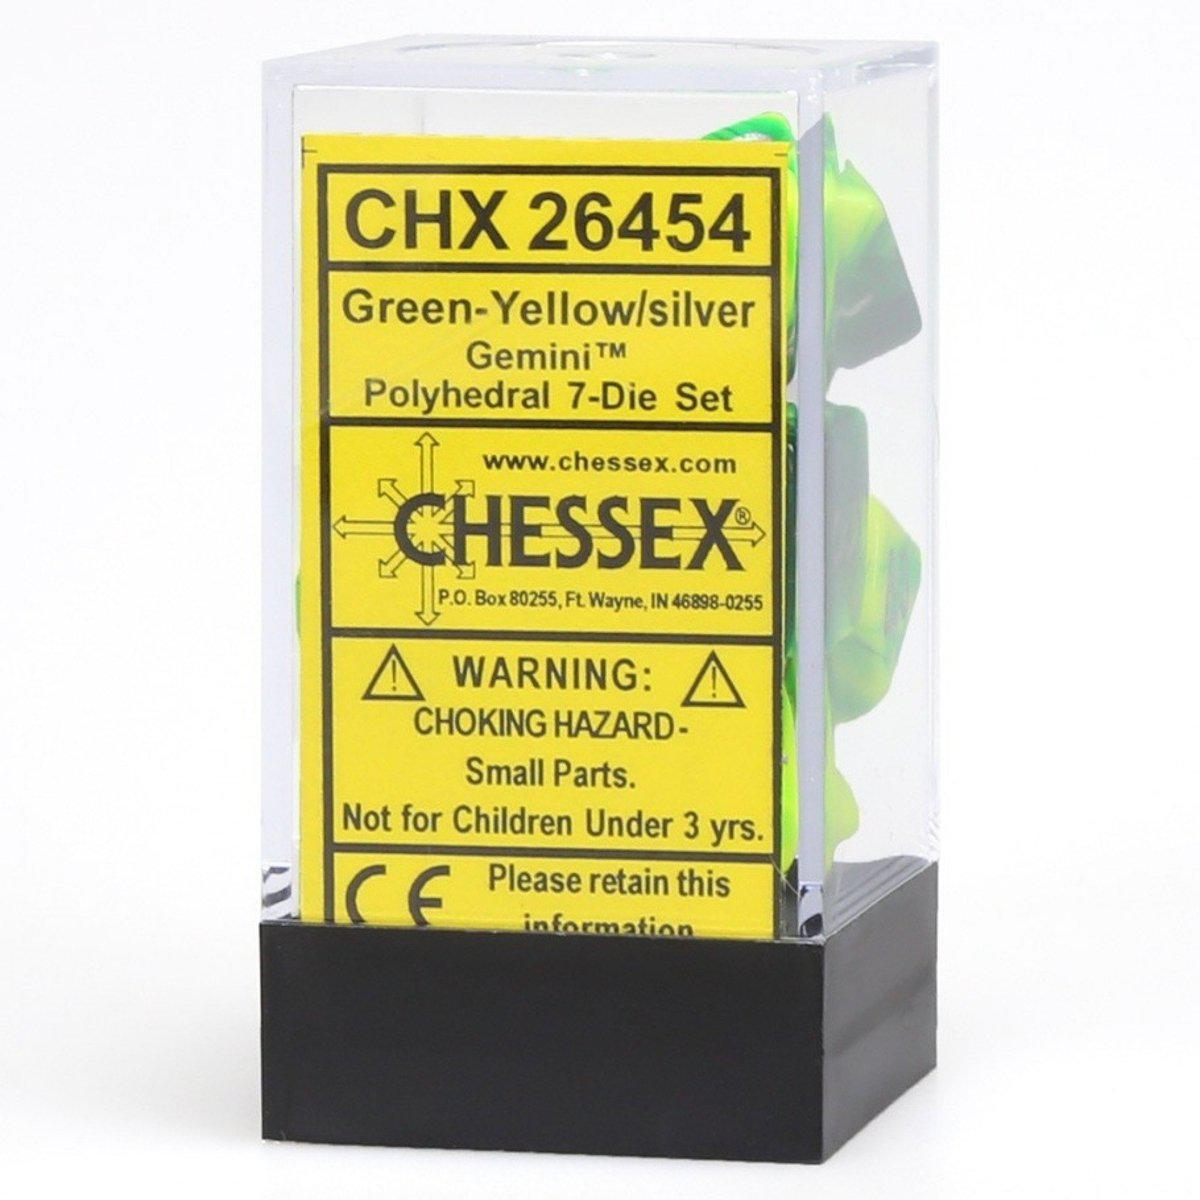 Chessex Gemini™ Polyhedral 7pcs Dice (Green-Yellow/Silver) [CHX26454]-Chessex-Ace Cards & Collectibles